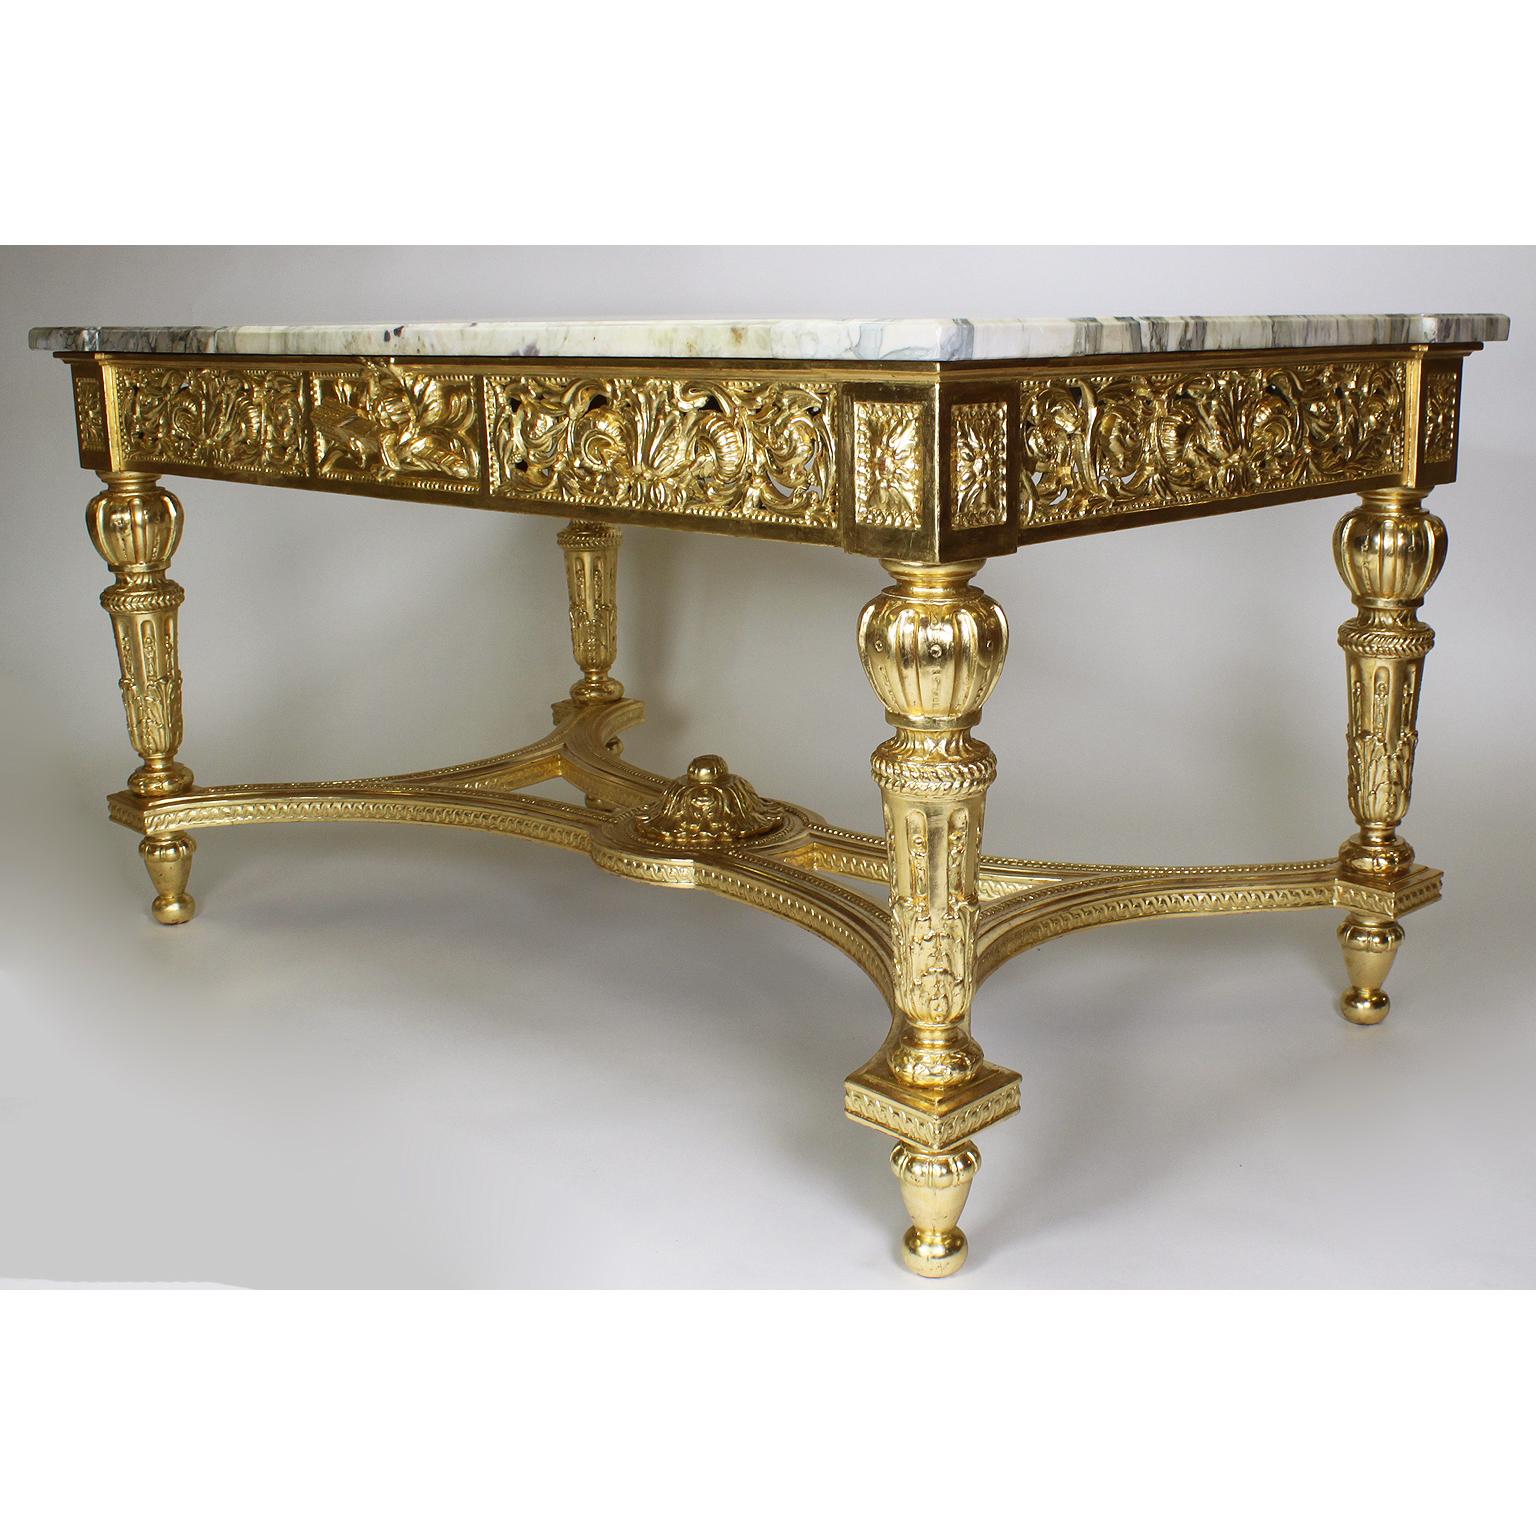 A fine French 19th-20th century Louis XVI style giltwood carved rectangular center table with marble top. The intricately giltwood carved frame with a pierced floral, acanthus and scrolled apron centered with a panel carved with a flamed quiver